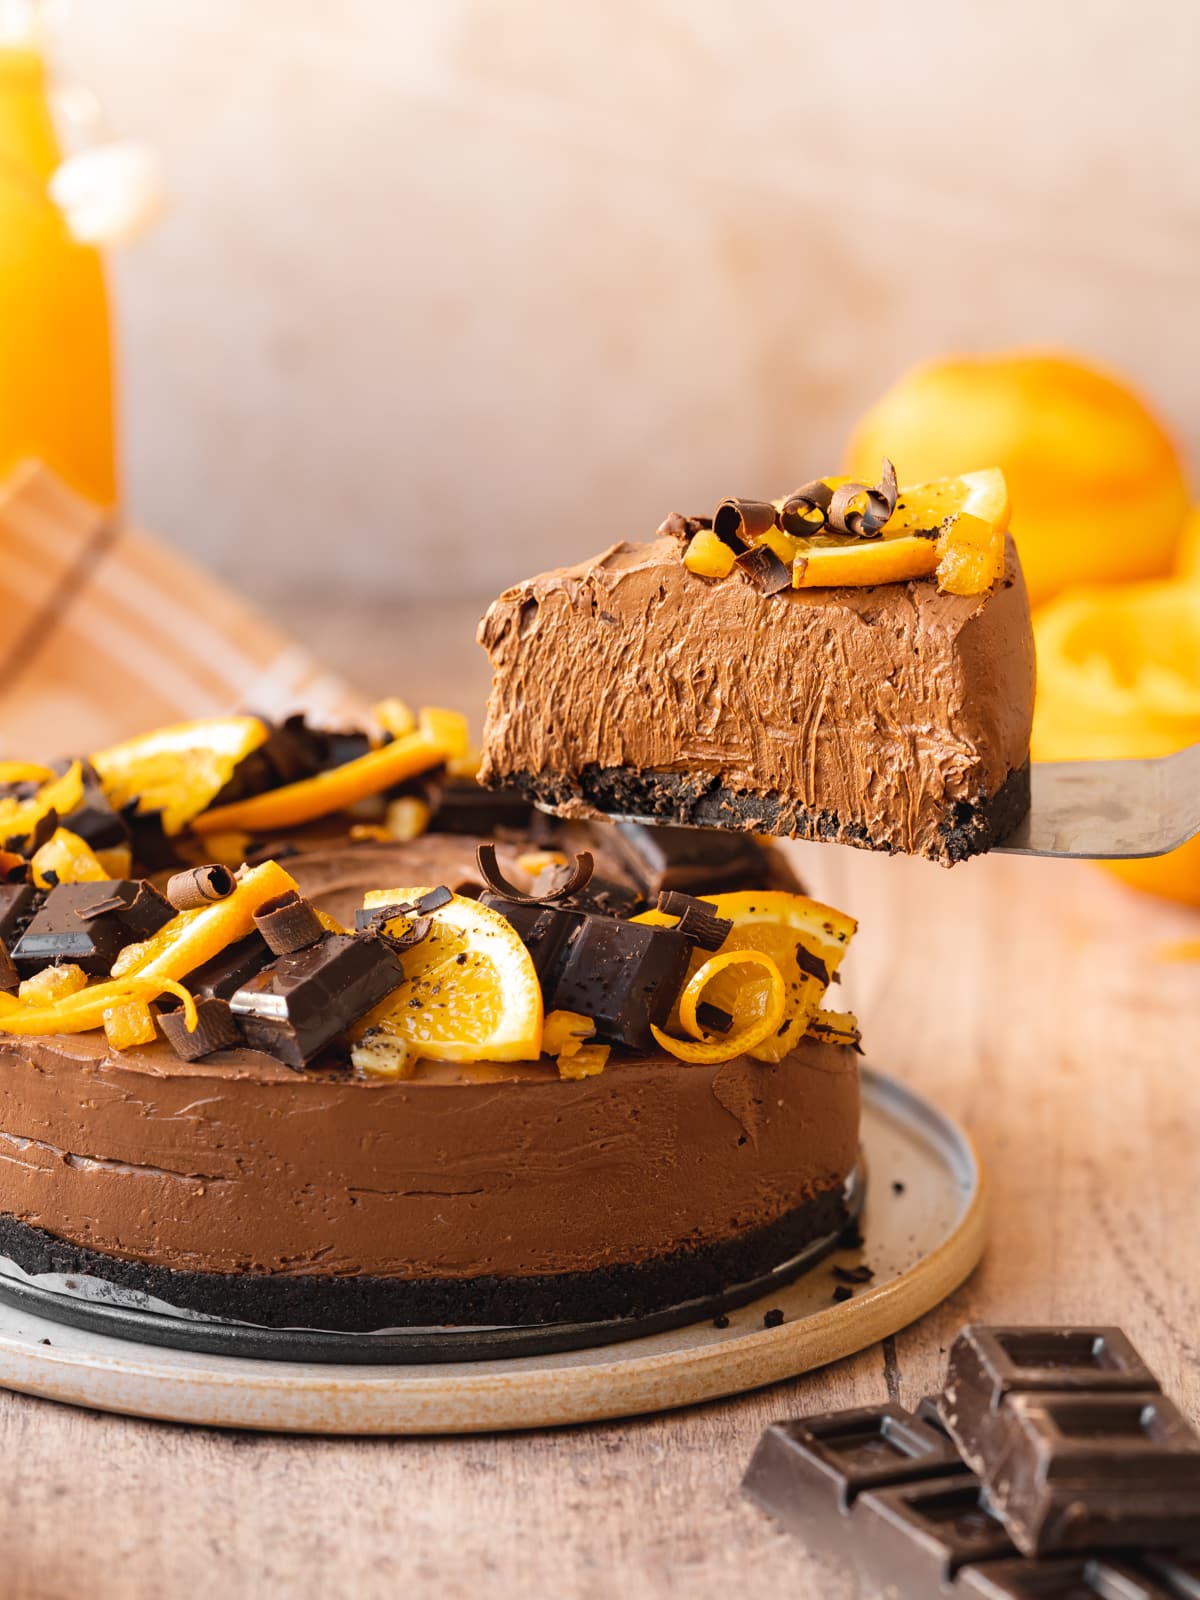 Side-on shot of a decorated orange chocolate cheesecake with a cake server removing a slice.